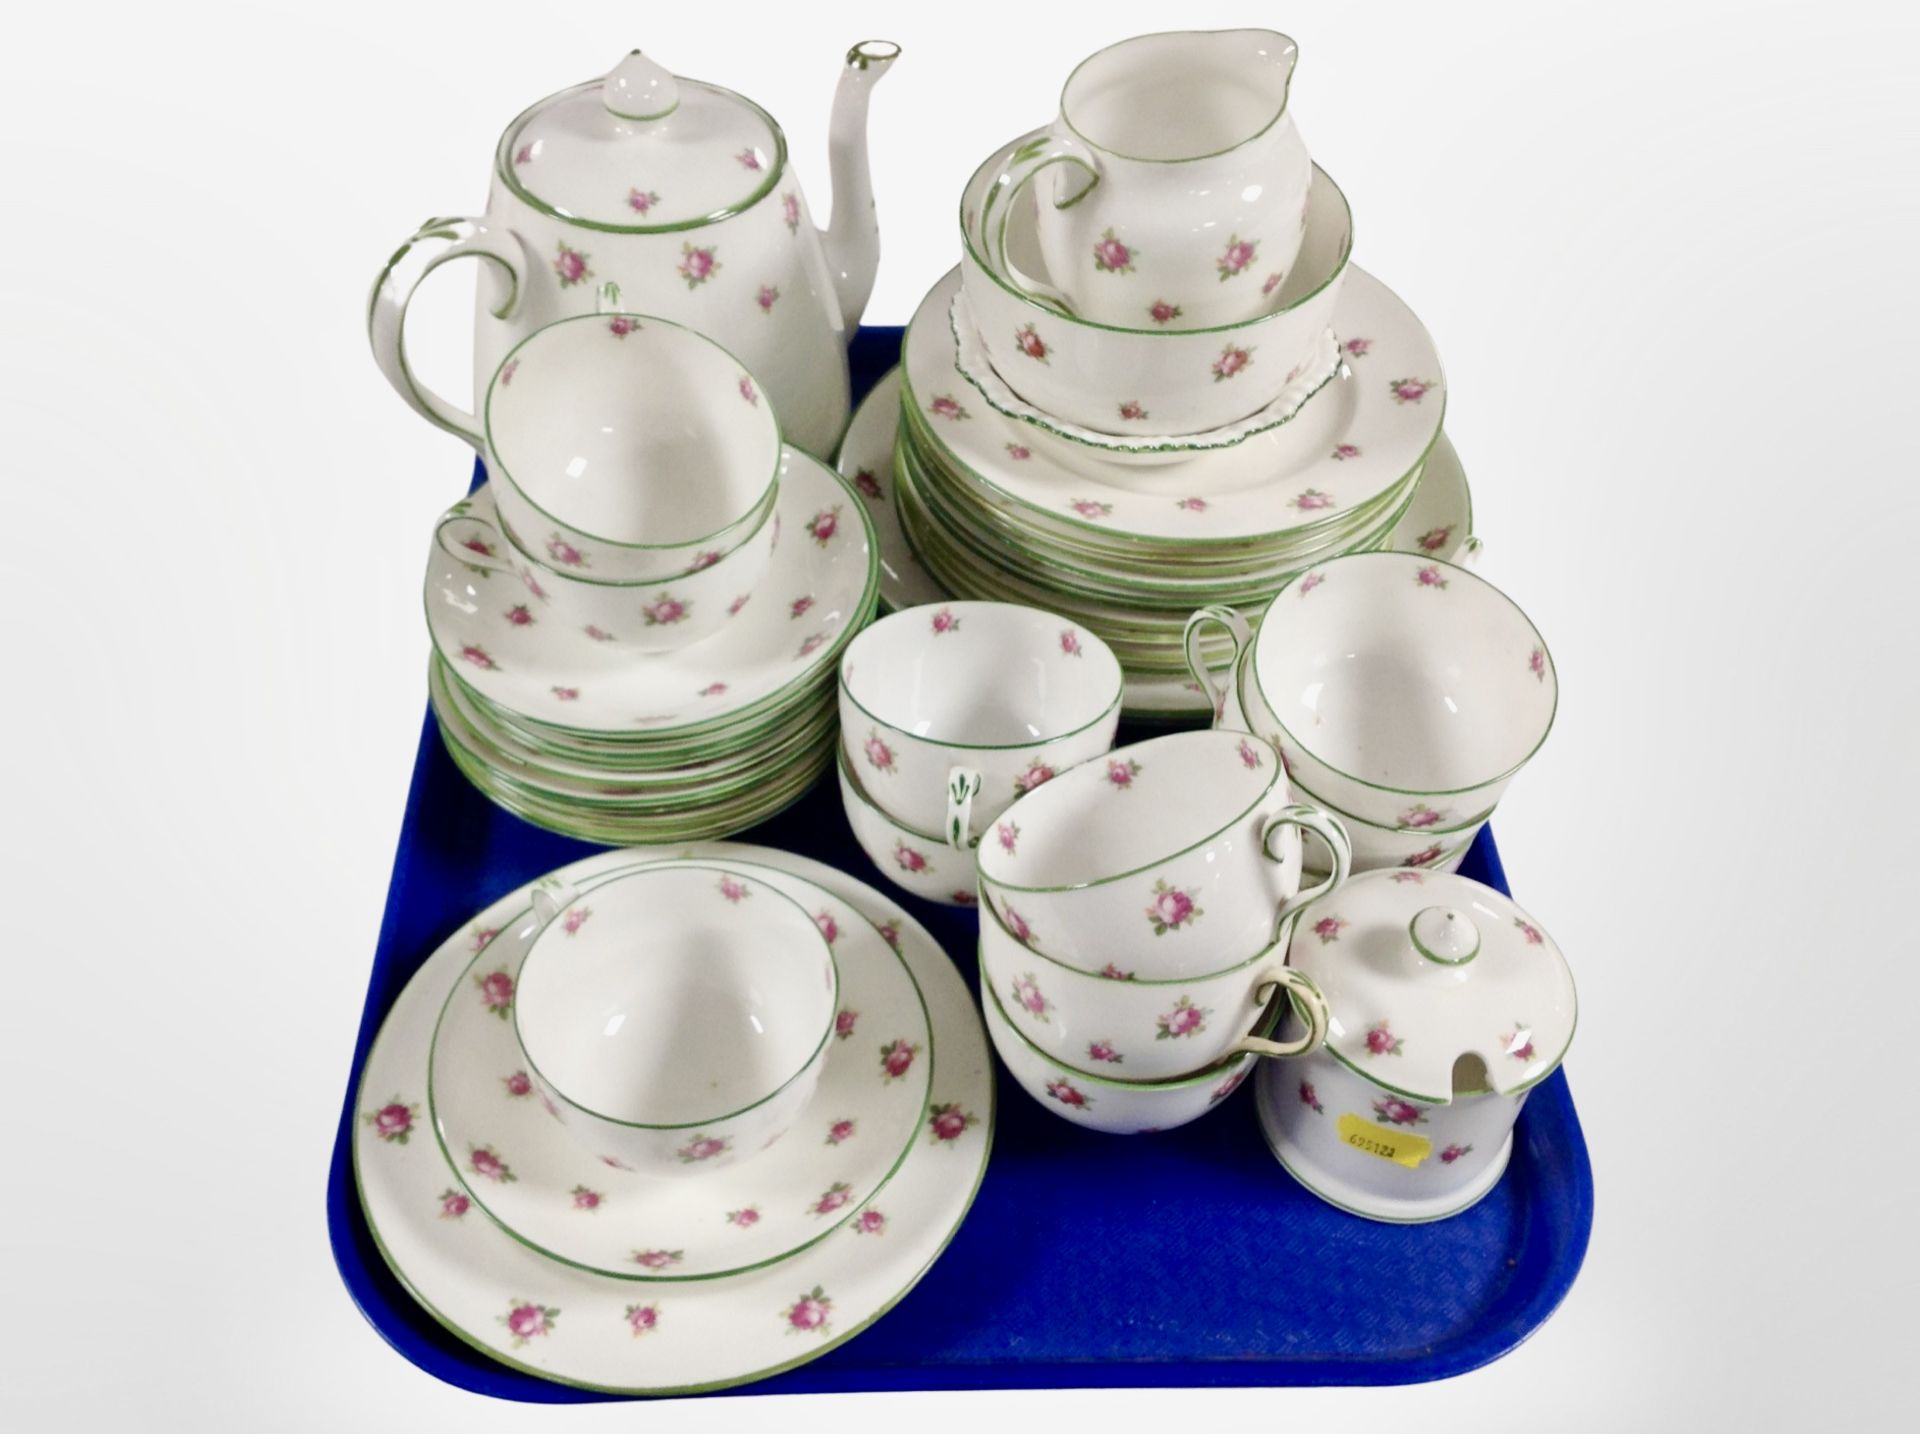 40 pieces of Crown Staffordshire tea china decorated with pink roses.